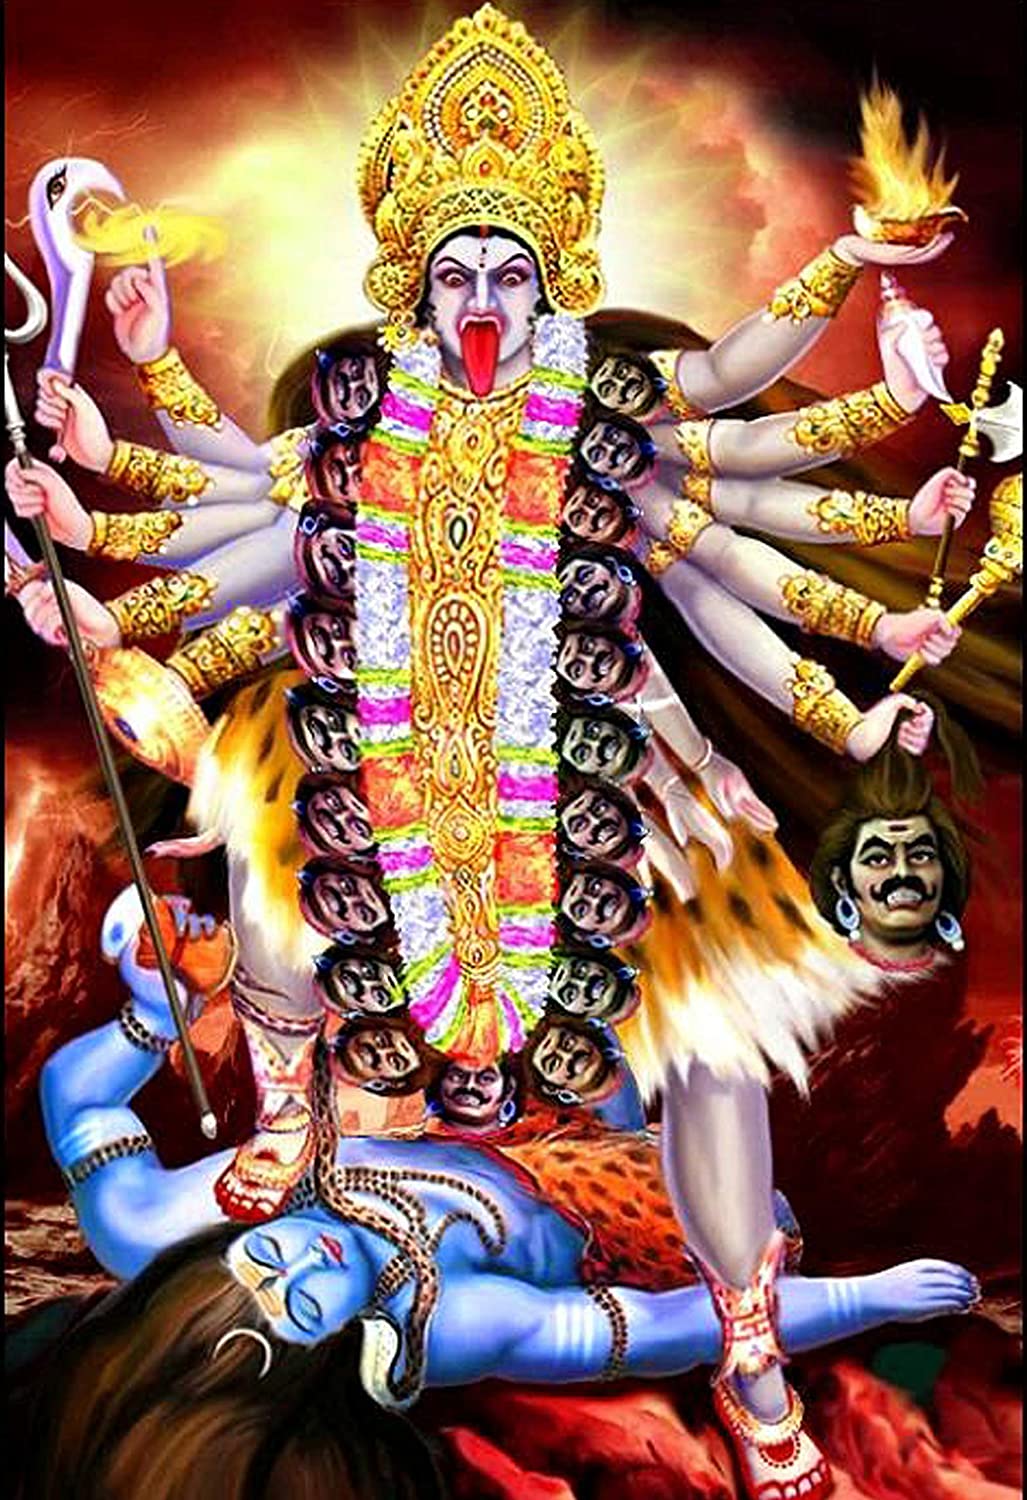 wallpics Mahakali Ma Wallpaper Glossy Photo Paper Poster for Living Room, Bedroom, Office, Kids Room, Hall (13X19), Amazon.in: Home & Kitchen